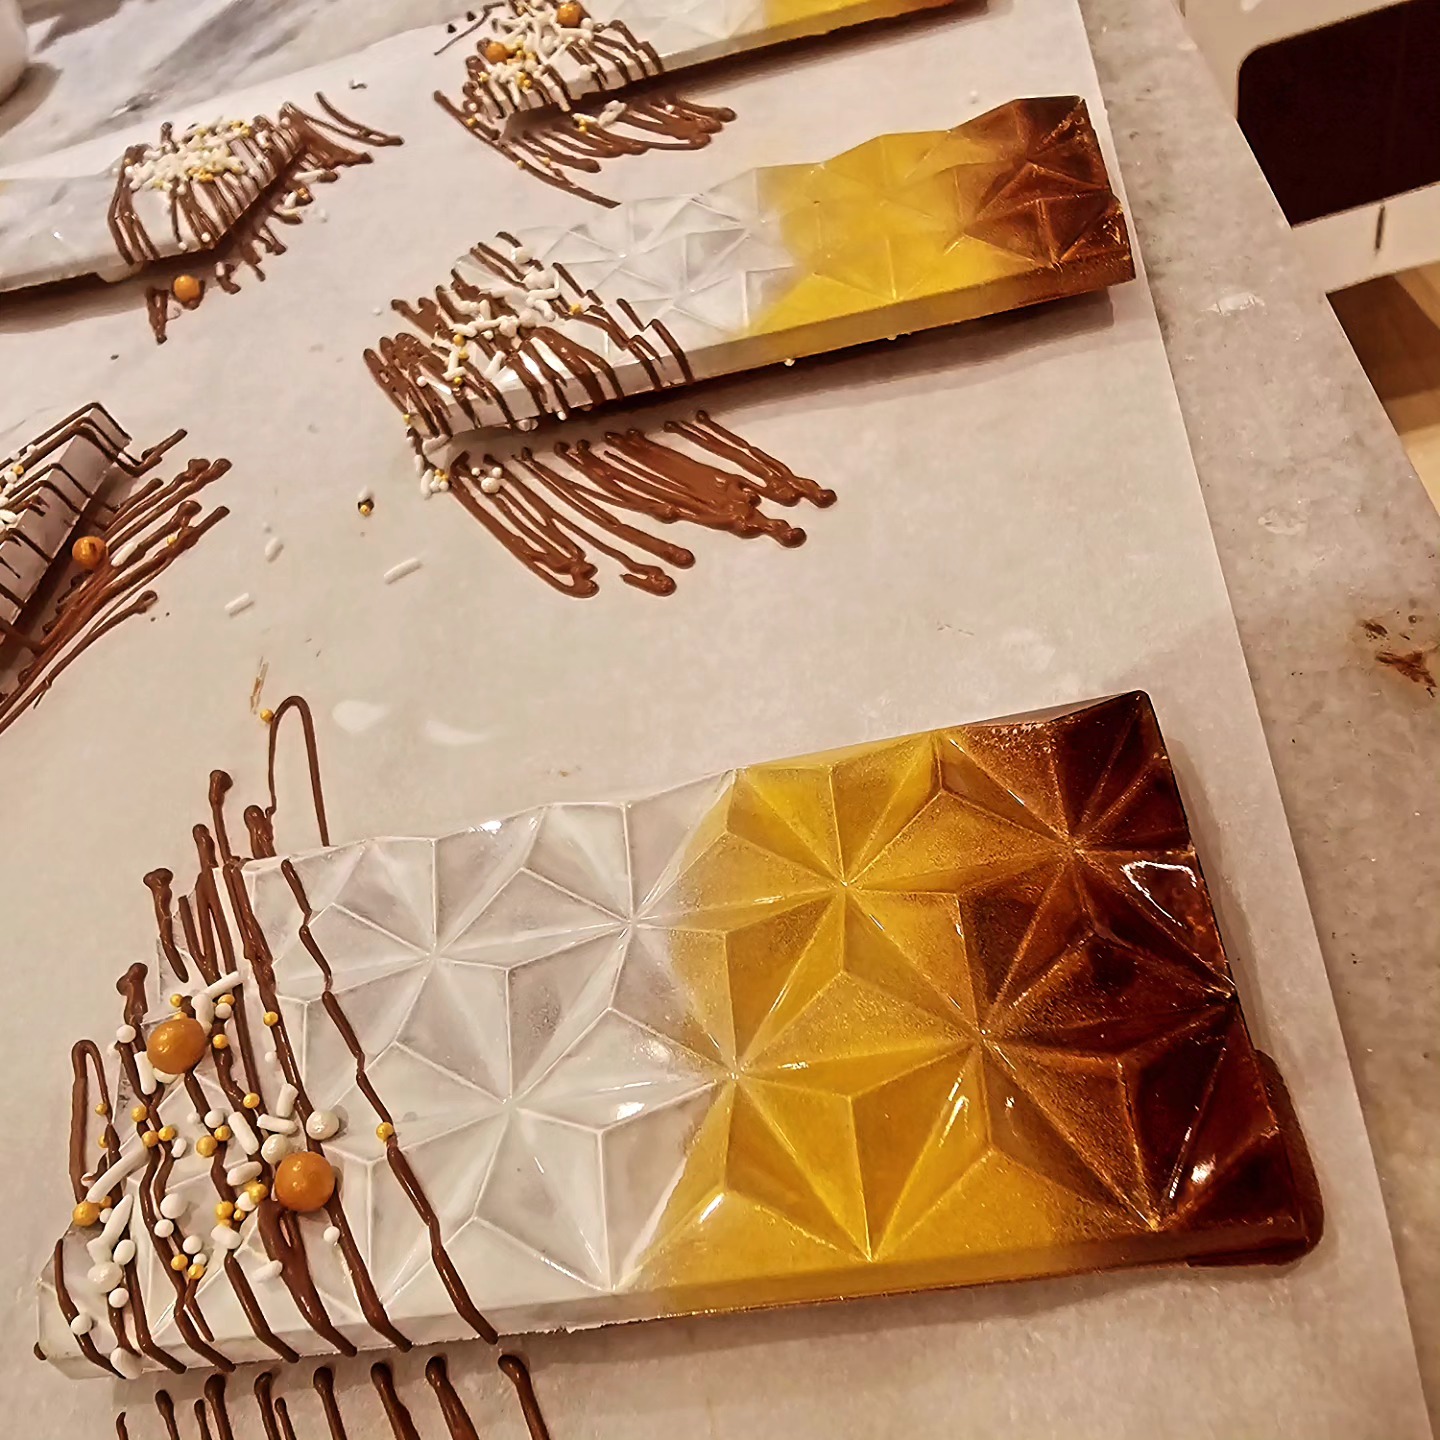 A selection of decadent chocolates are under production on a workspace, expertly crafted to provide the ultimate taste experience.